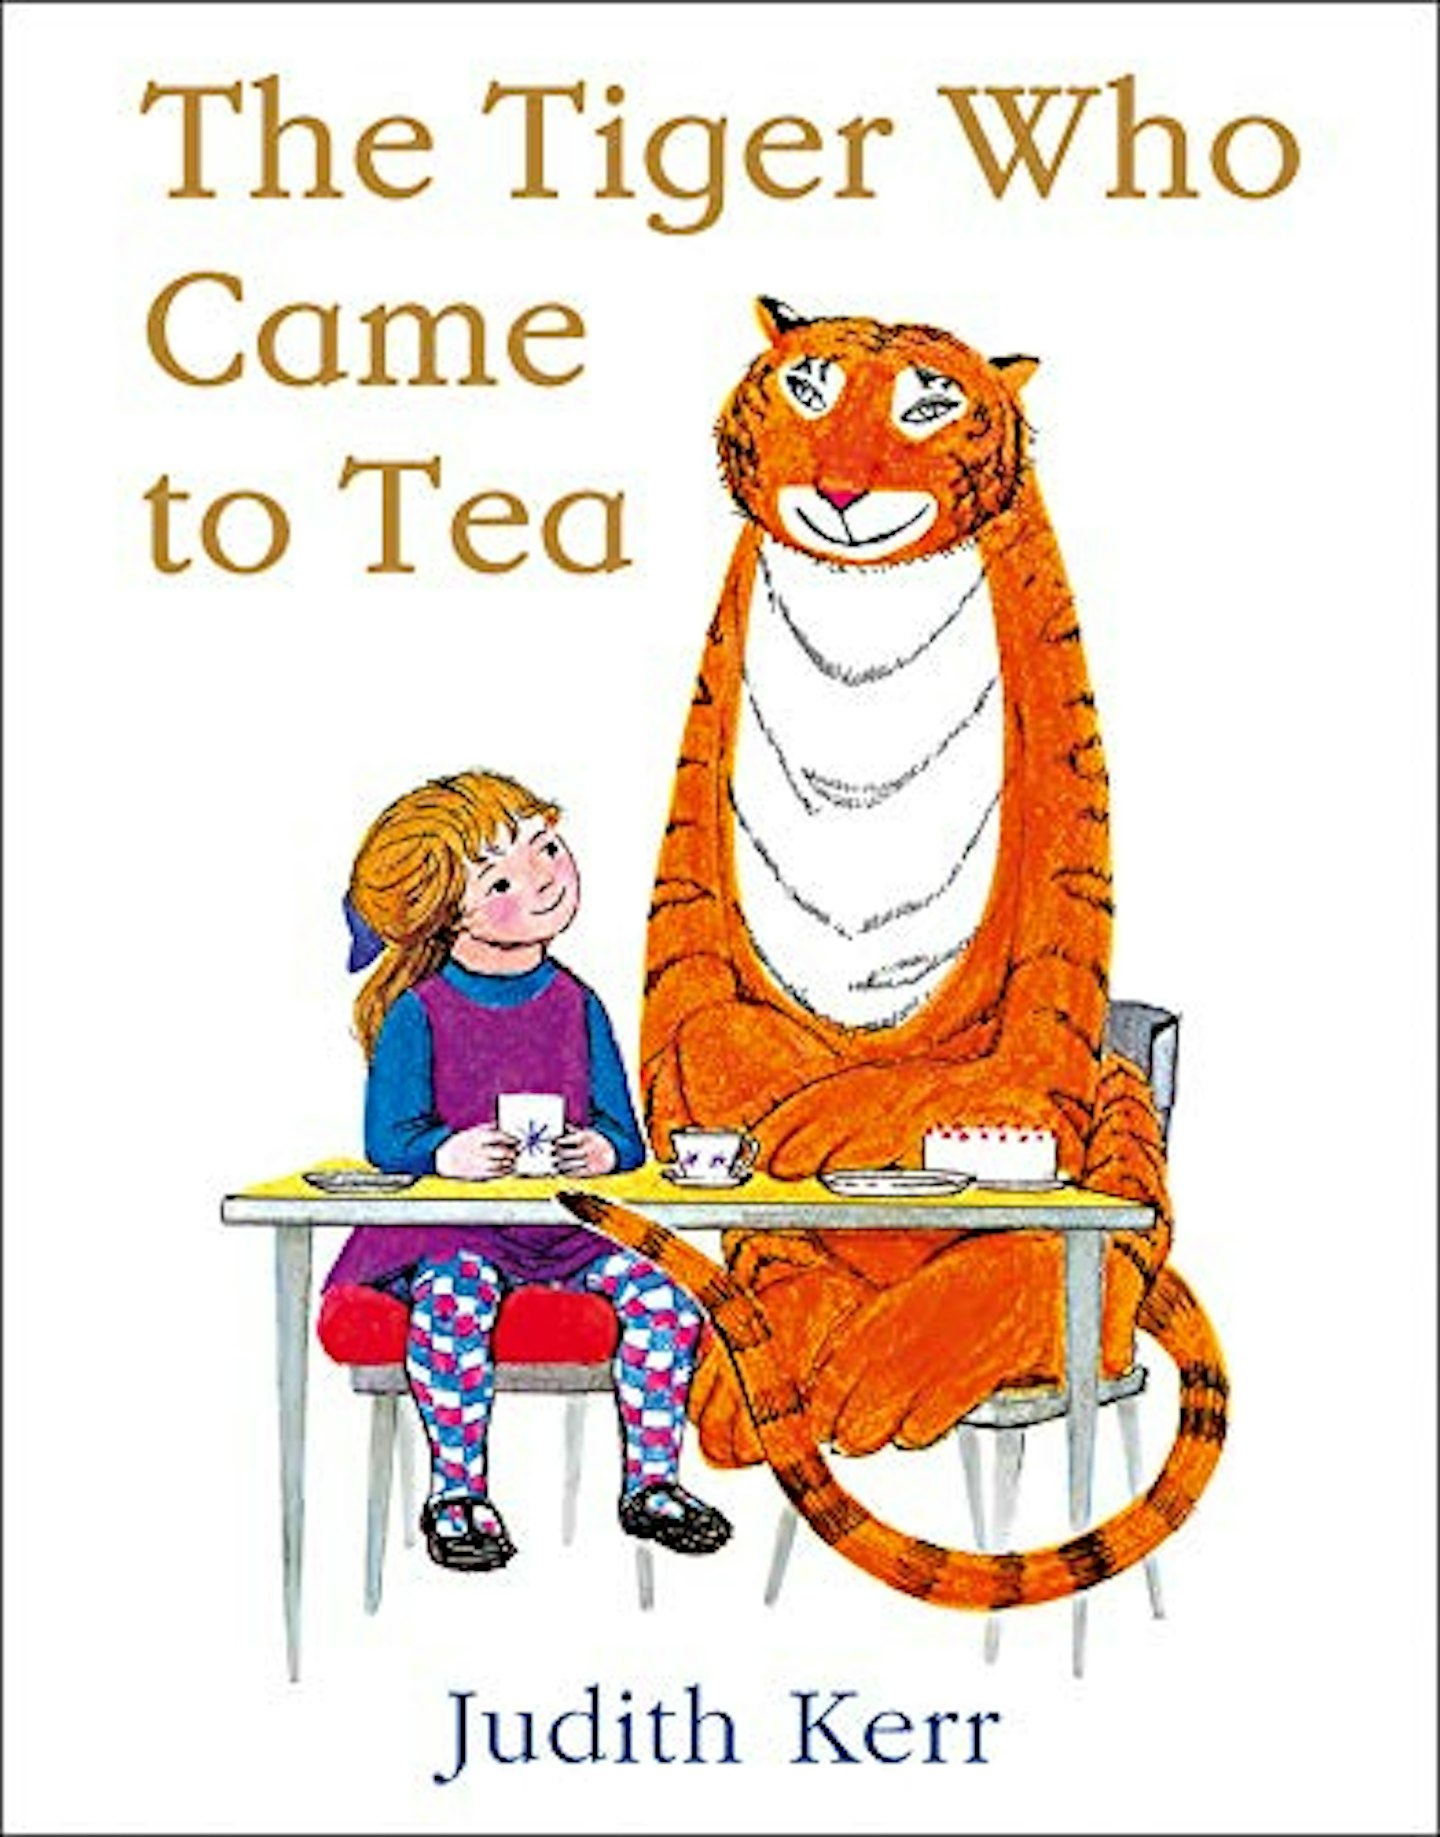 The Tiger Who Came to Tea